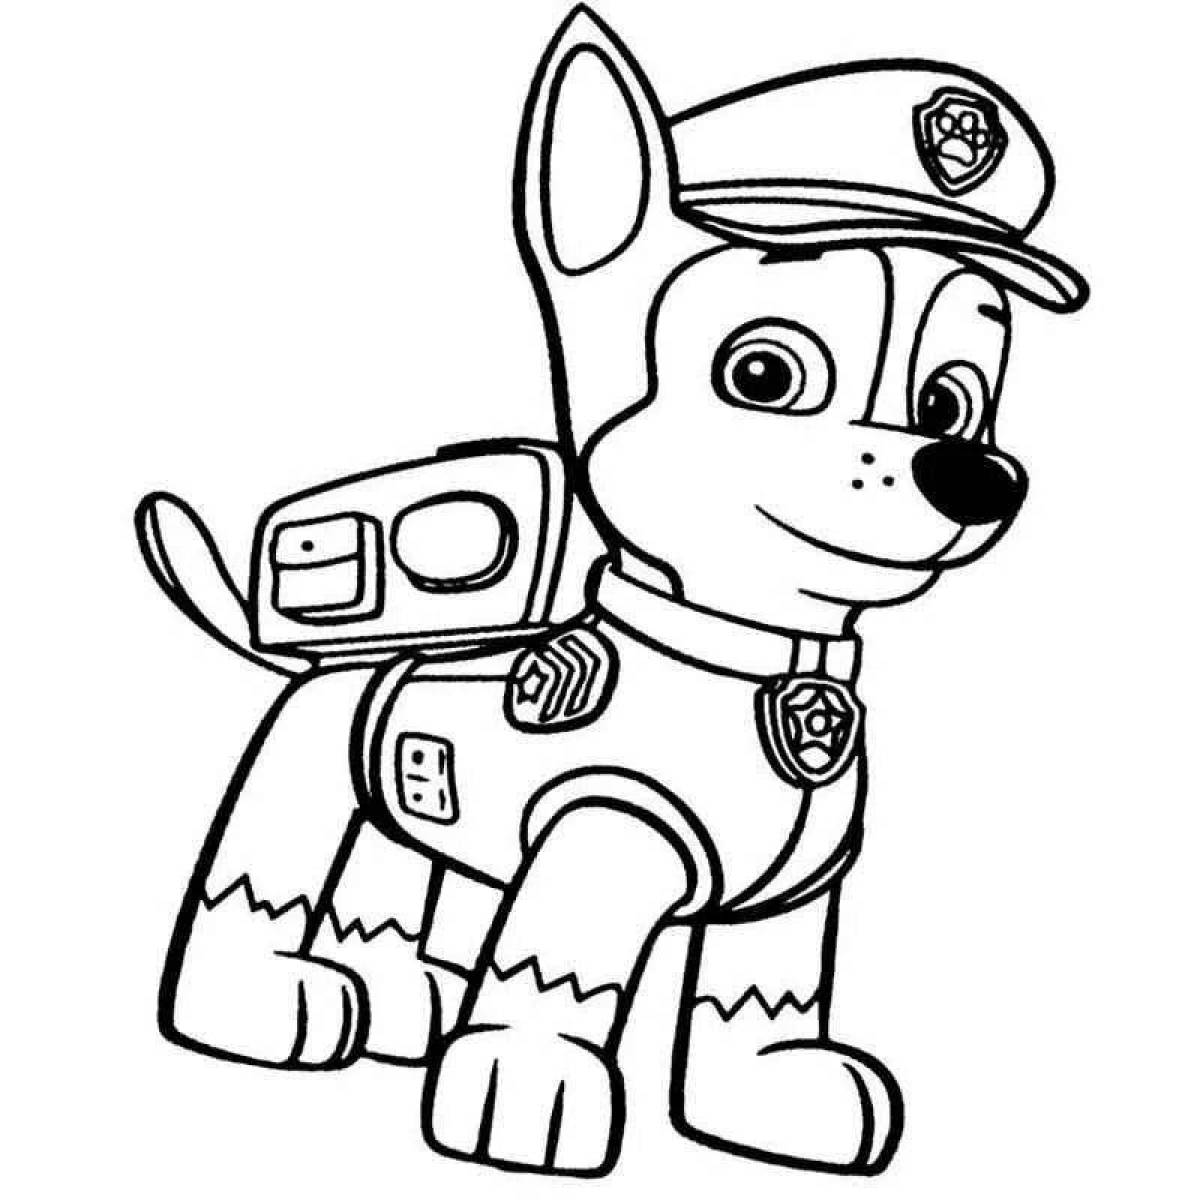 Coloring page dazzling racer